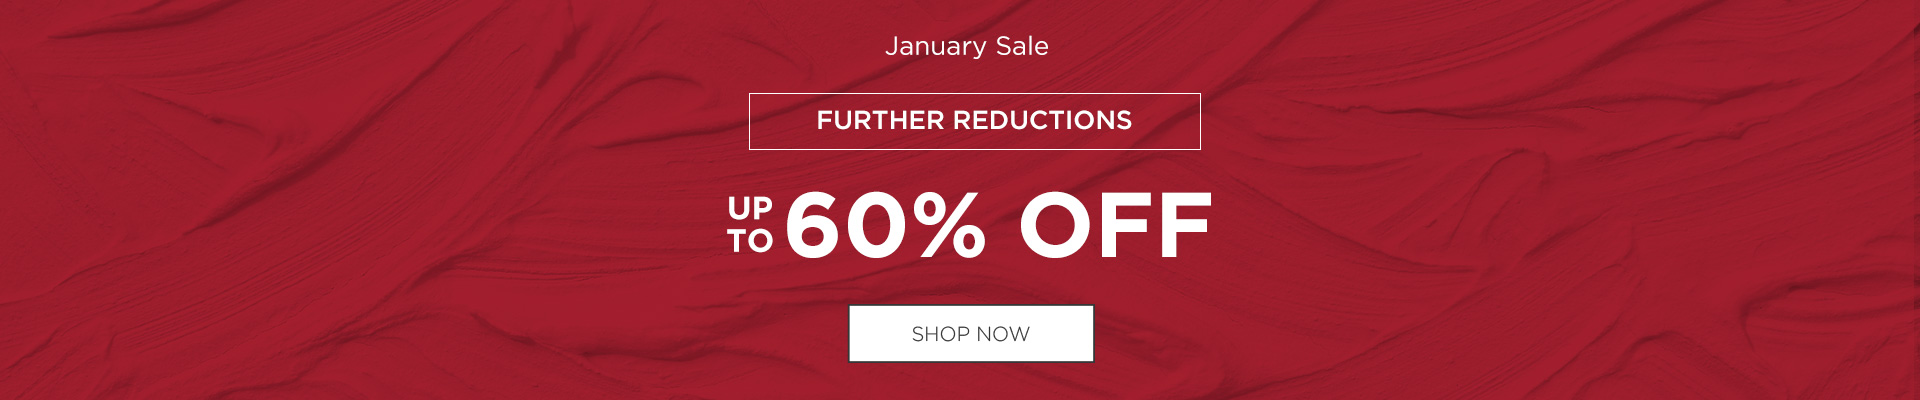 January Sale | further reductions |now up to 60% off | Shop All Sale